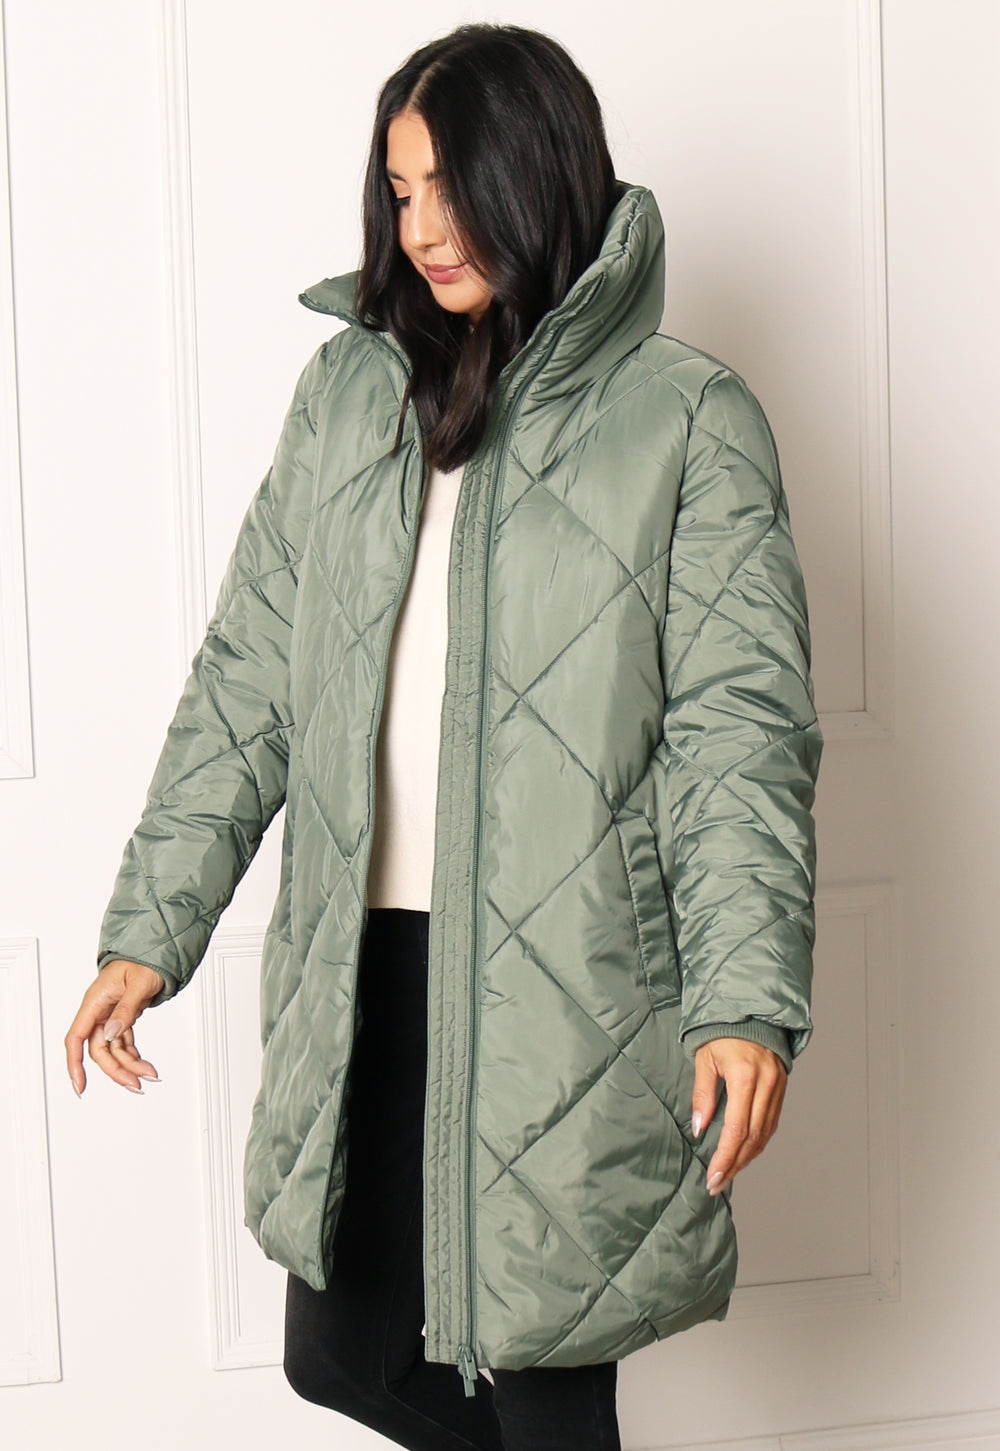 VILA Adaya Diamond Quilted Longline Puffer Coat with Funnel Neck in Soft Green - One Nation Clothing